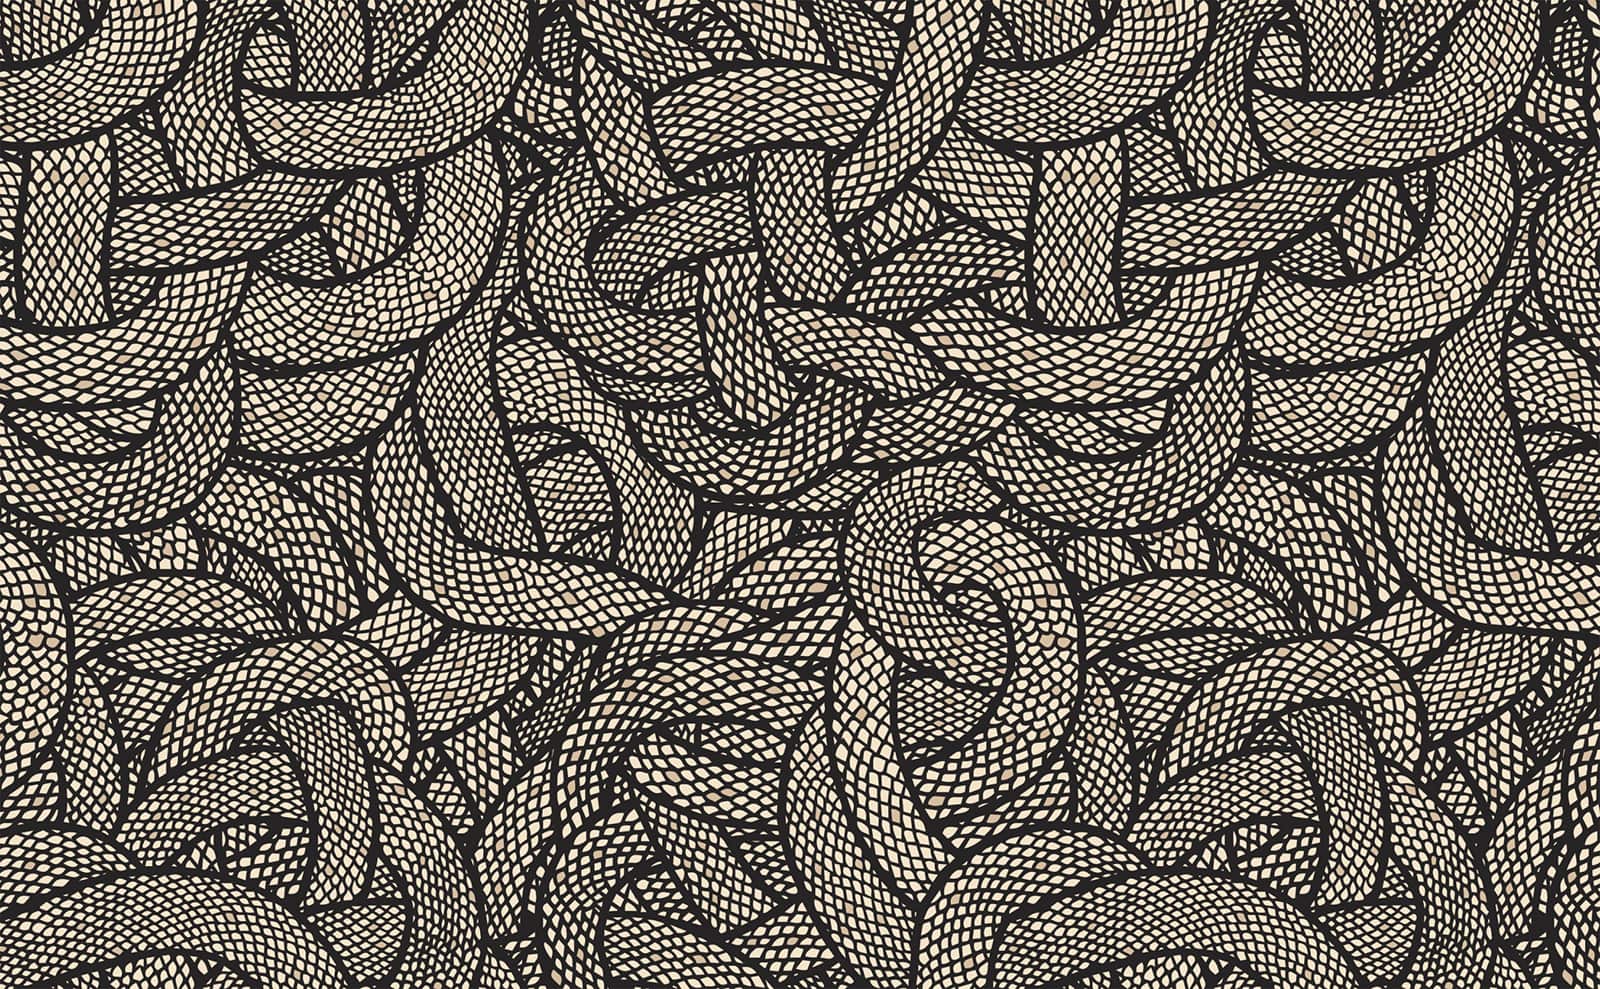 Premium Vector  Snake skin seamless patternuse for wallpaper wrapping  paper fabric vector illustration